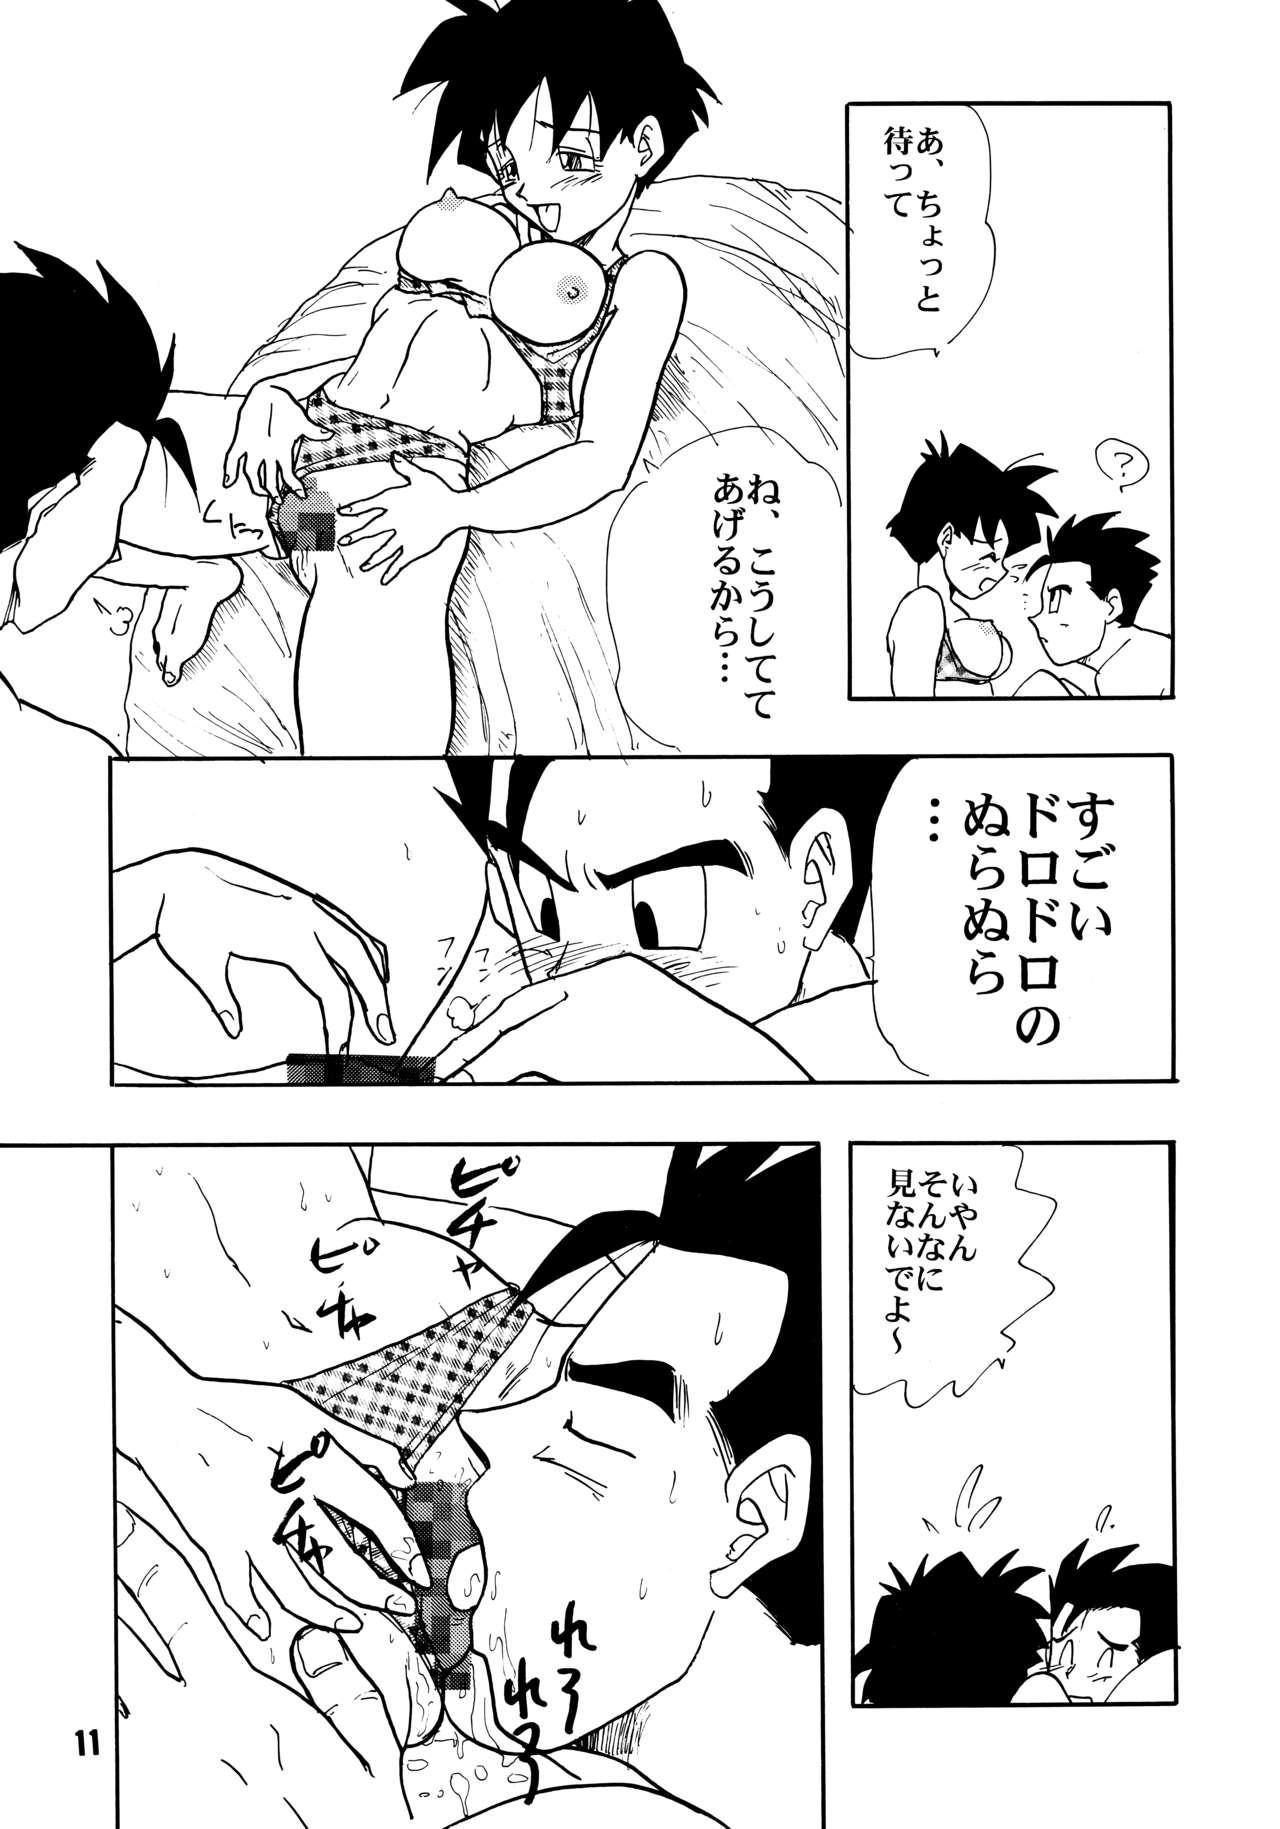 Close ZZZ - Dragon ball z Picked Up - Page 11